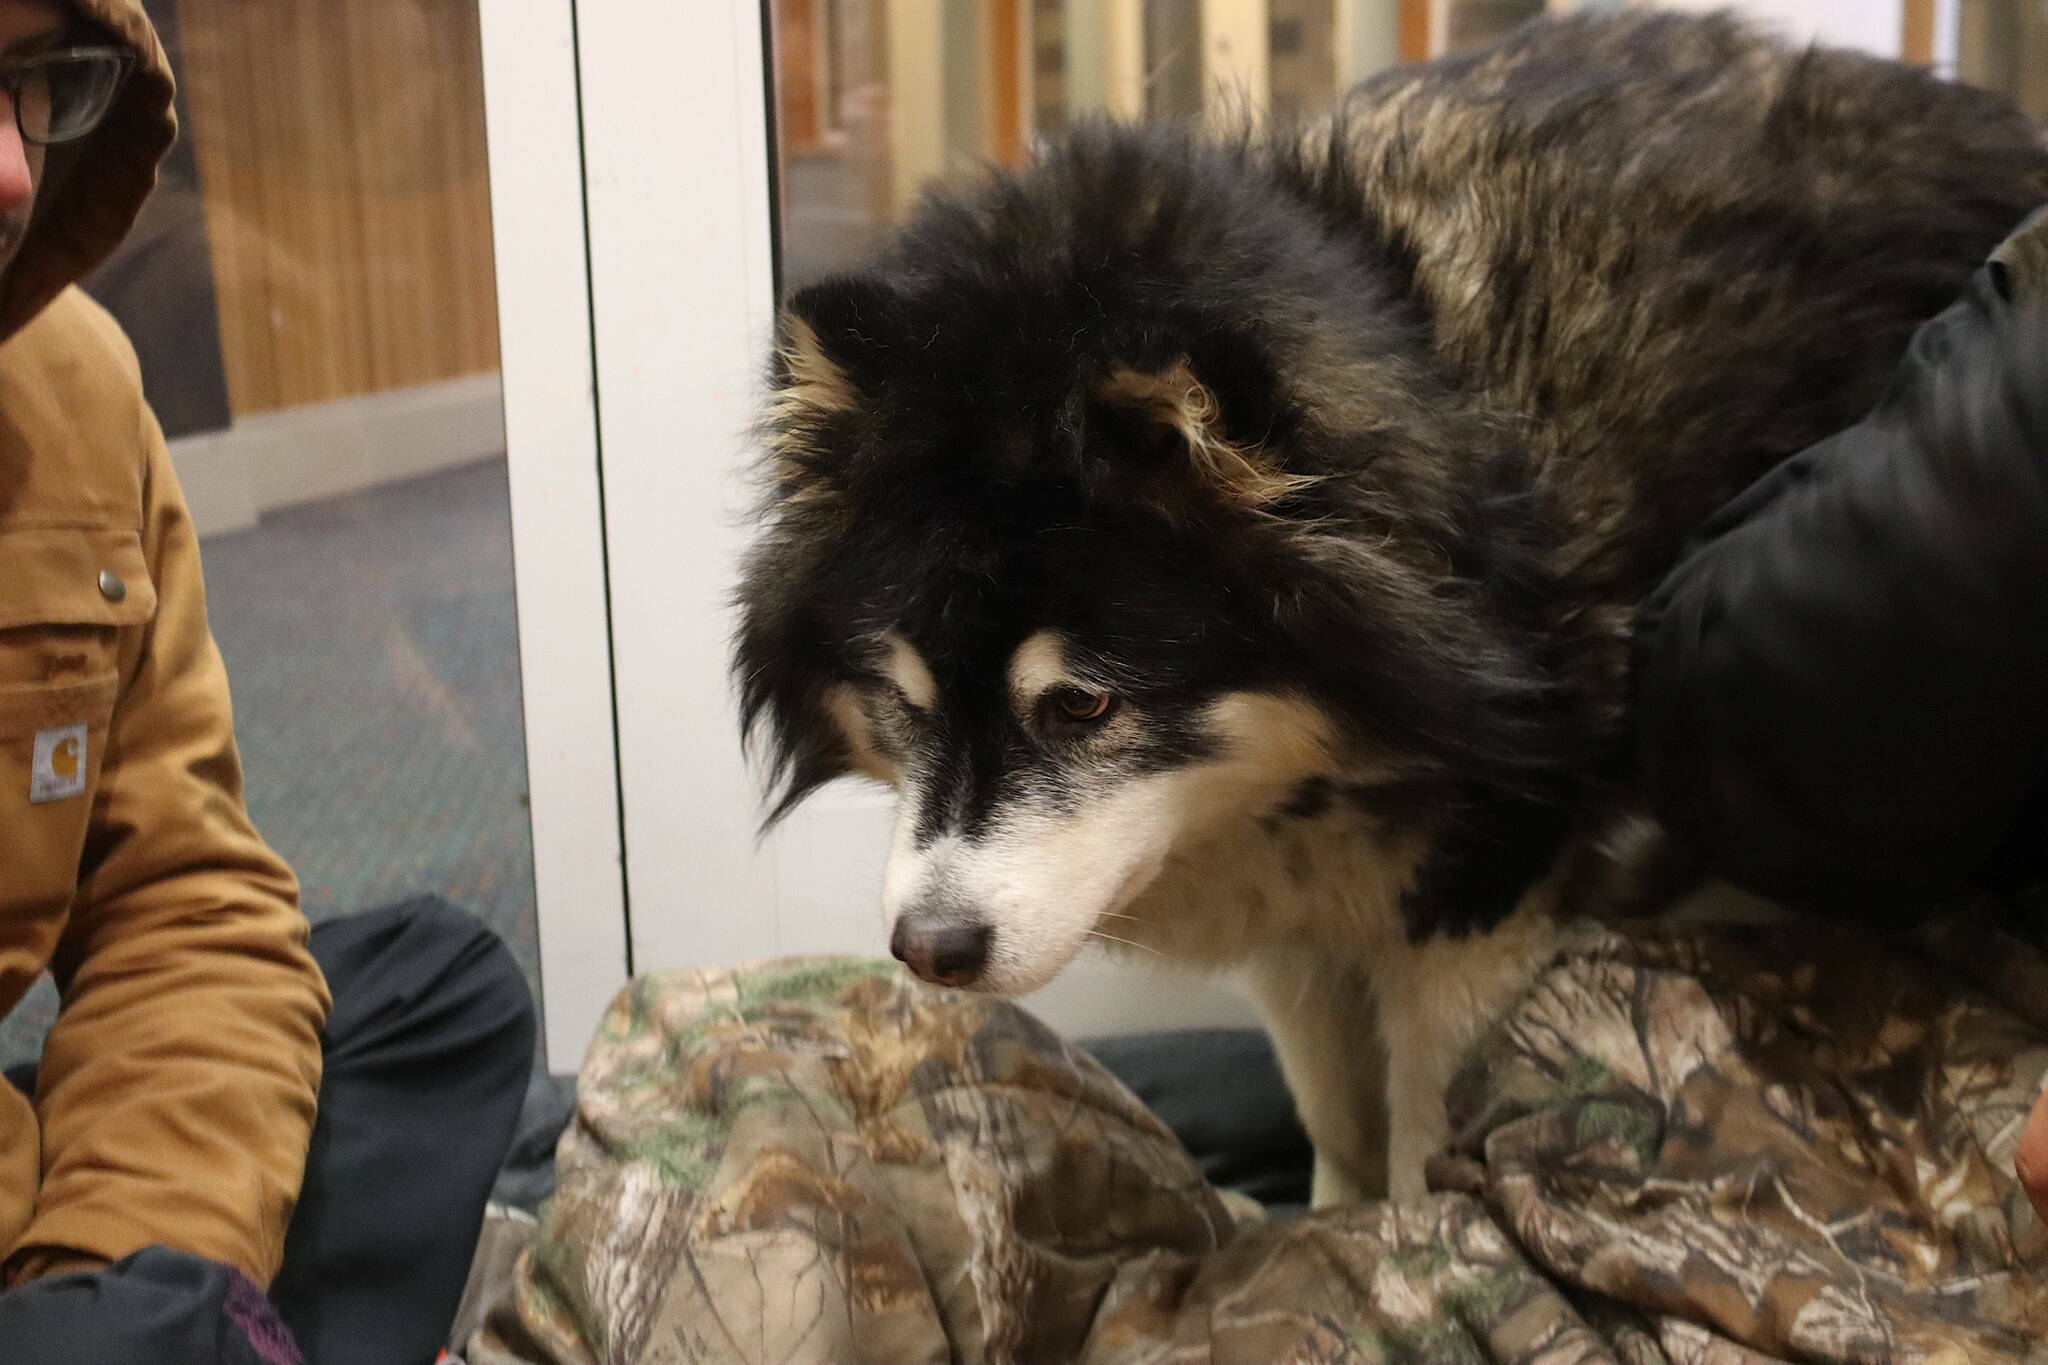 Juno, a canine companion to local resident Steven Kissack, is rousted from her slumber by the approach of another dog at the sheltered entrance of a building on Front Street on Dec. 24, 2023. (Mark Sabbatini / Juneau Empire file photo)